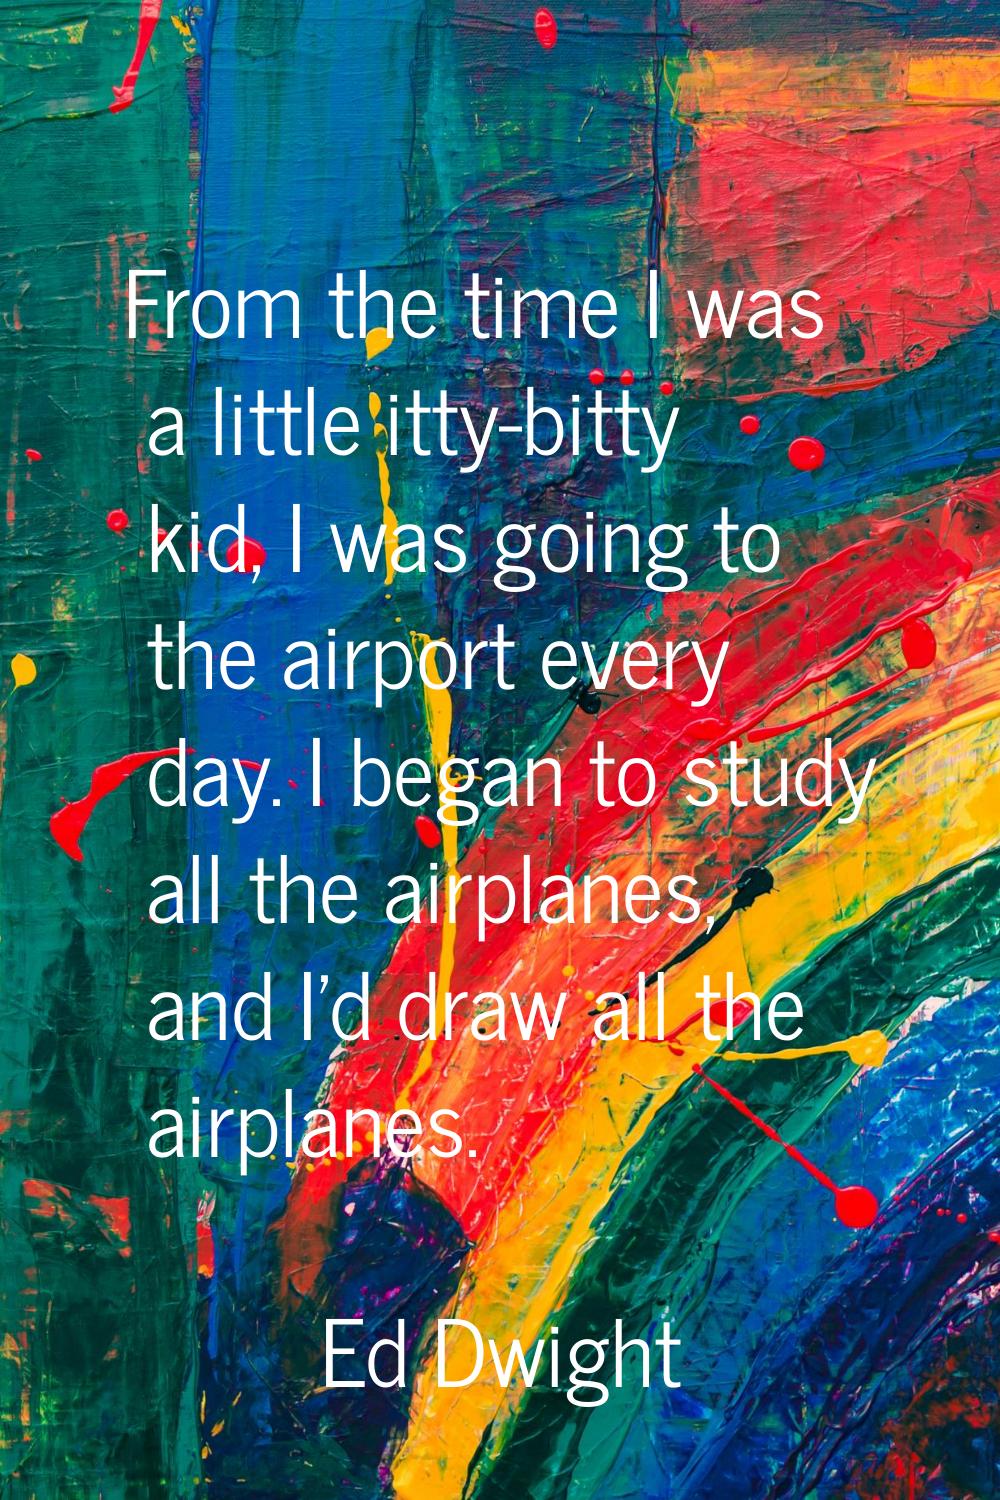 From the time I was a little itty-bitty kid, I was going to the airport every day. I began to study